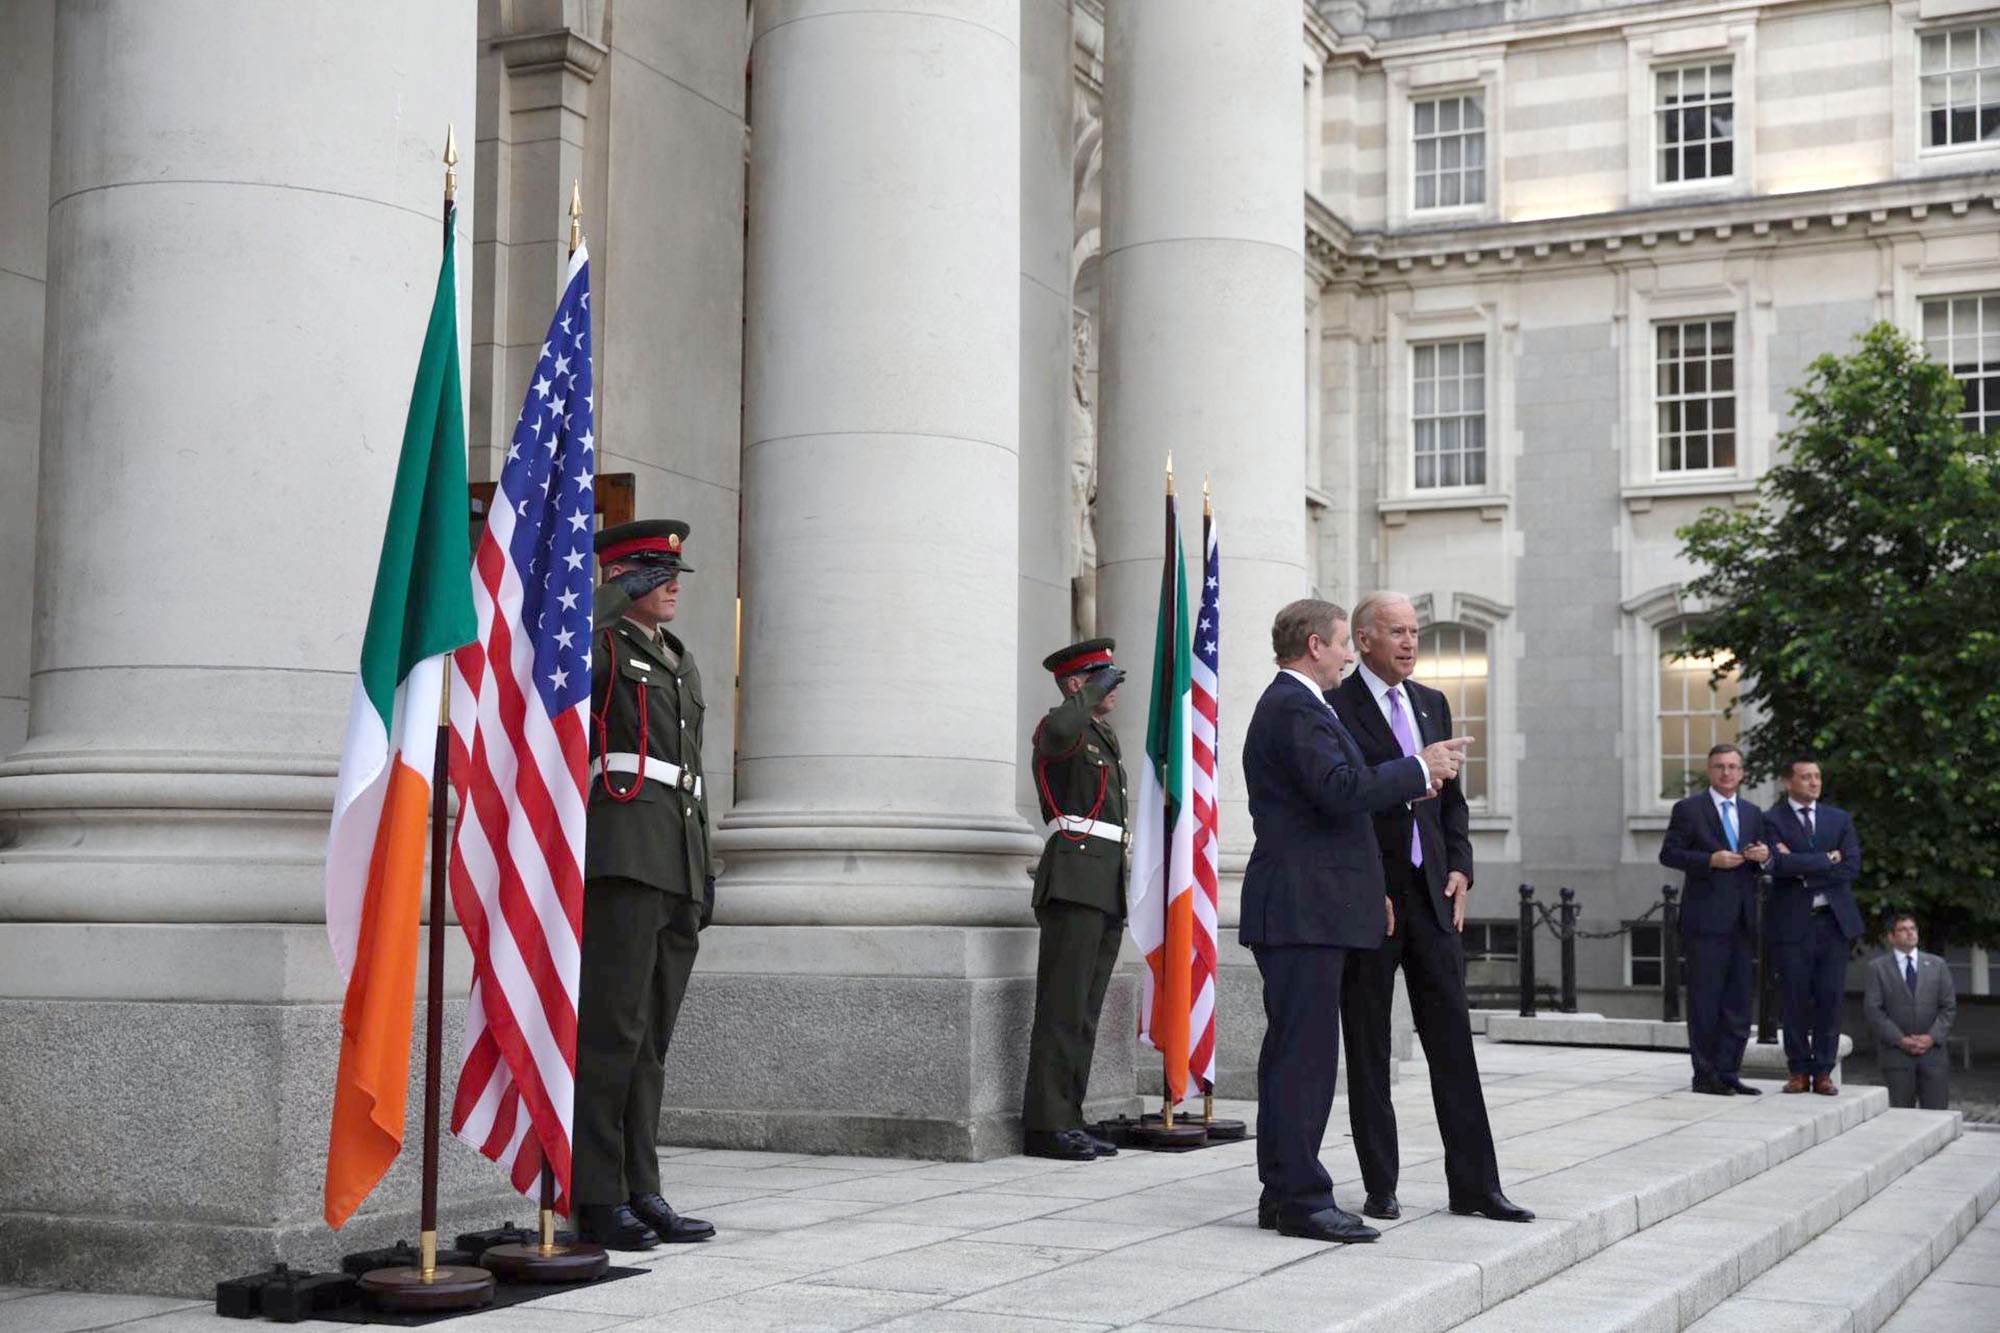 Vice President Joe Biden is greeted by Taoiseach Kenny outside the government building before their bilateral meeting, in Dublin, Ireland, June 21, 2016. (Official White House Photo by David Lienemann)